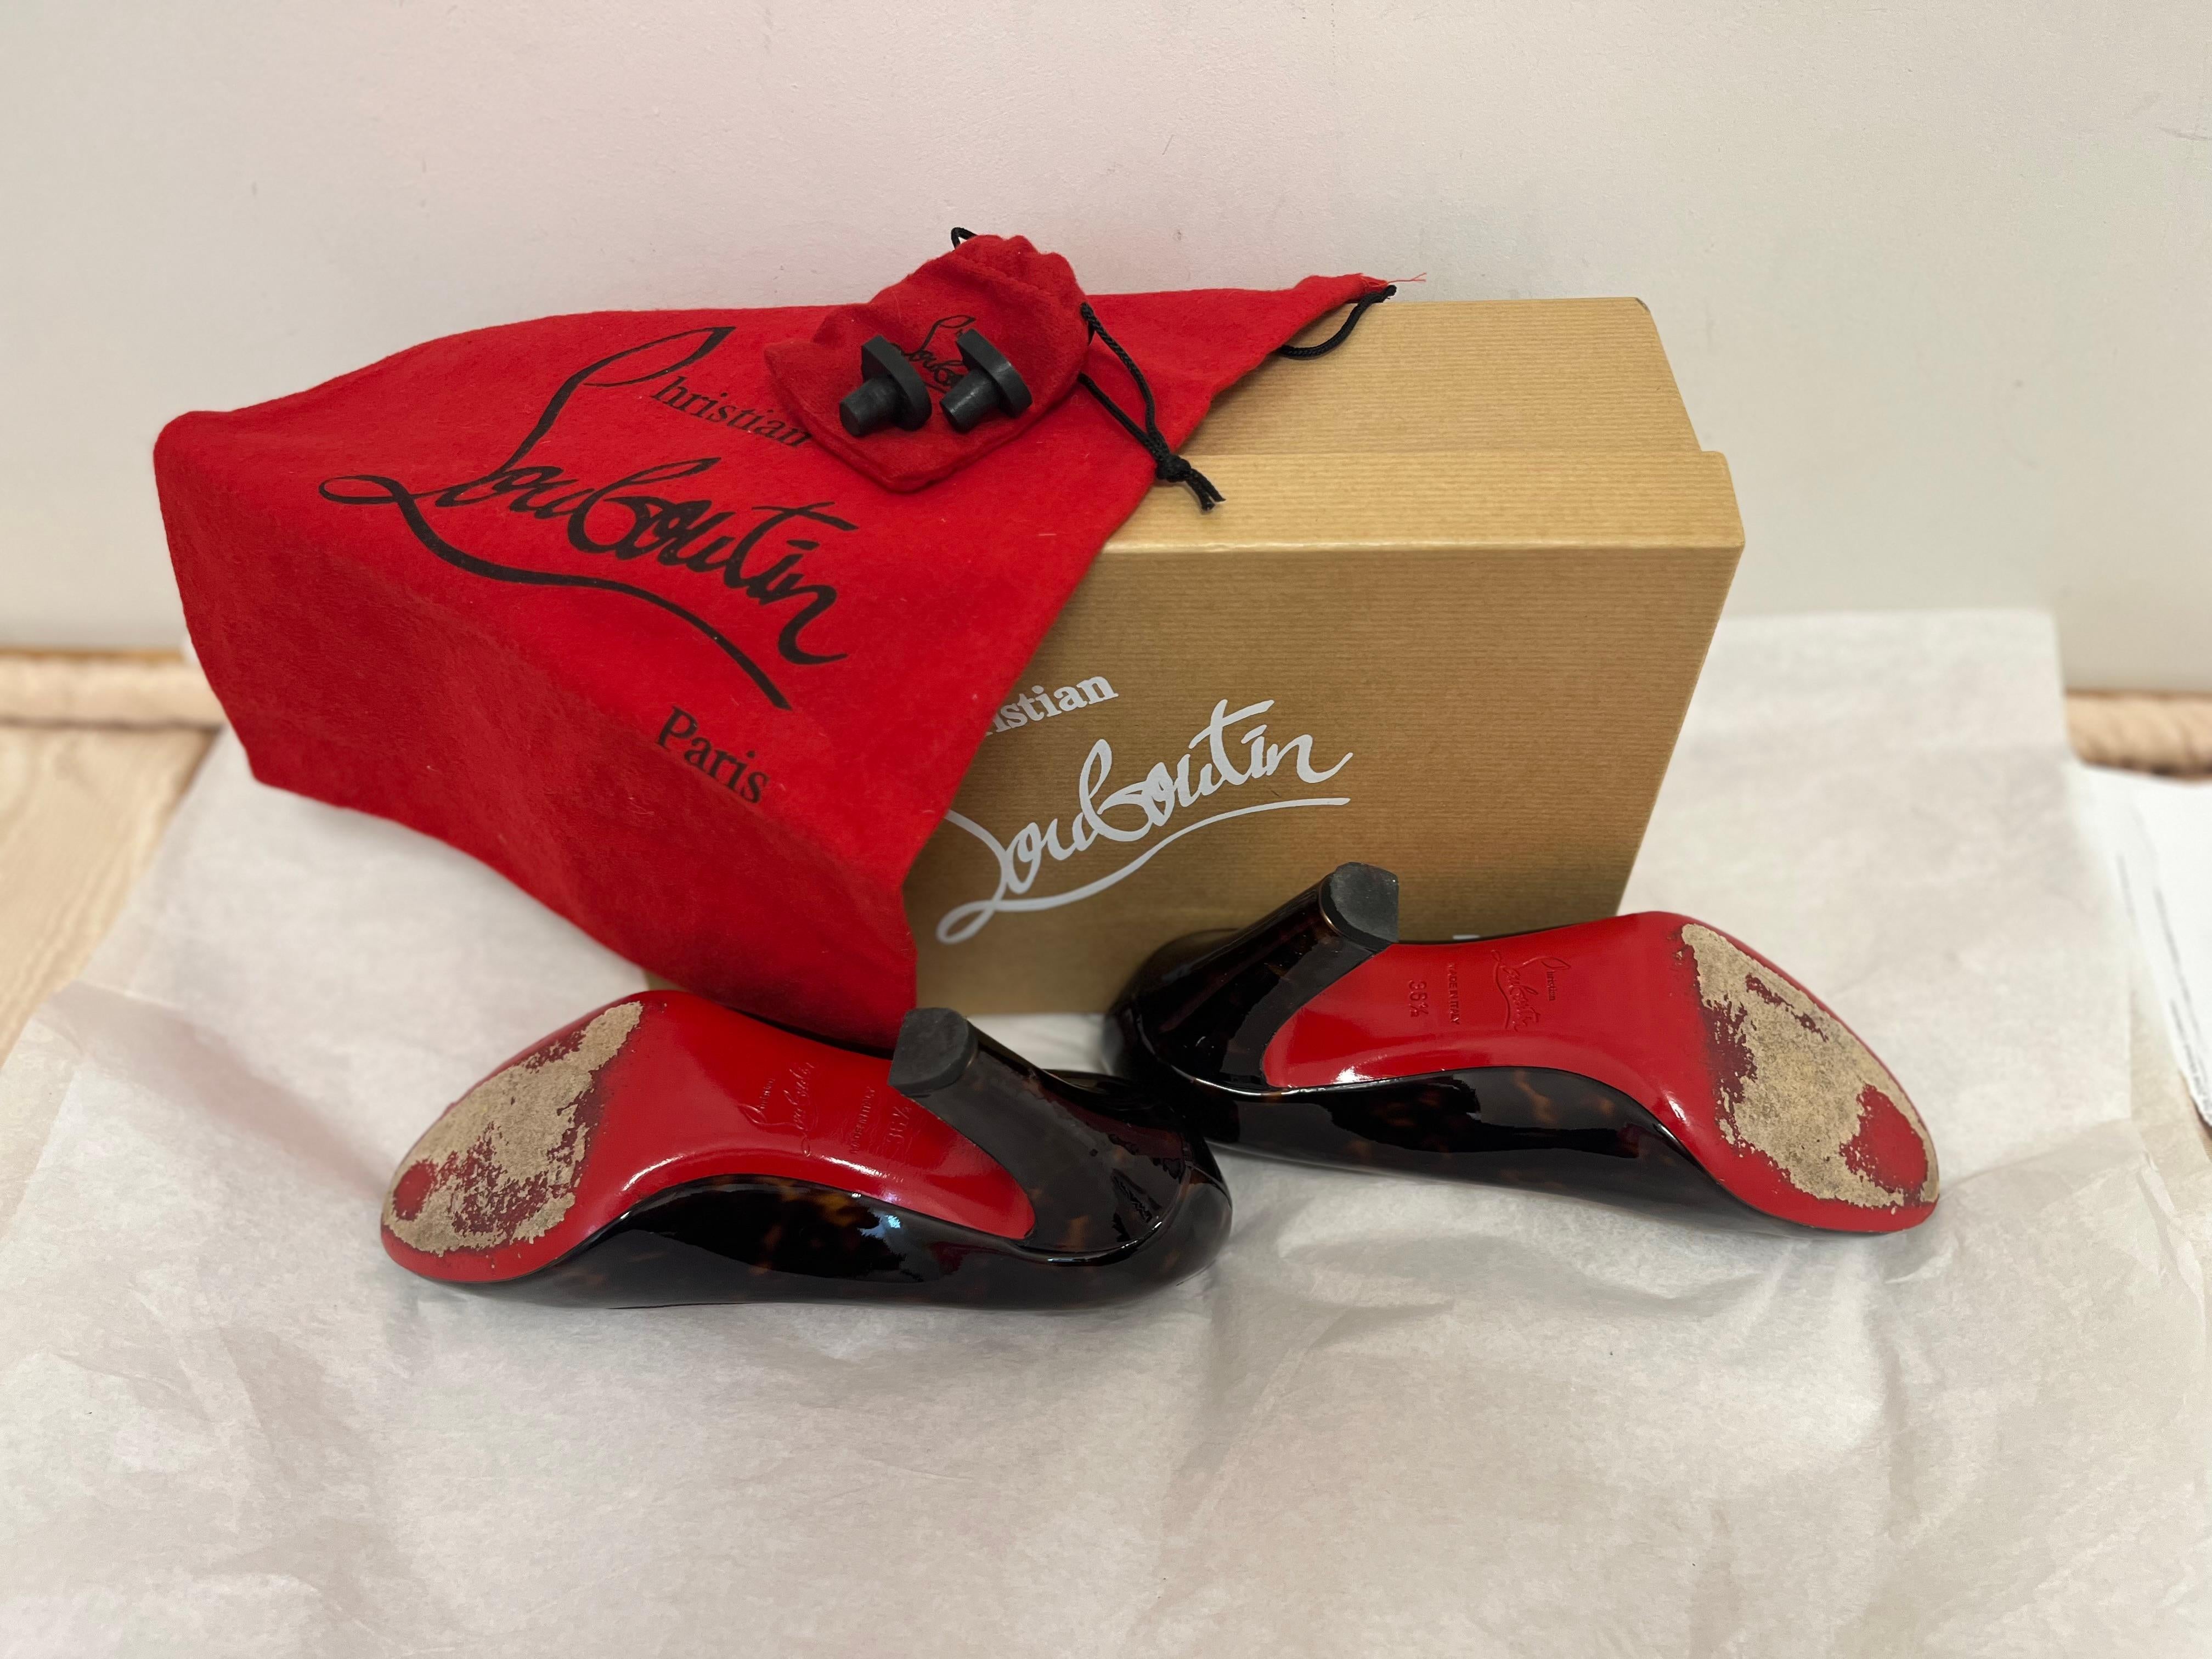 Christian Louboutin Tortoise Shell Pattern Patent Shoes 6.5 with Box For Sale 4